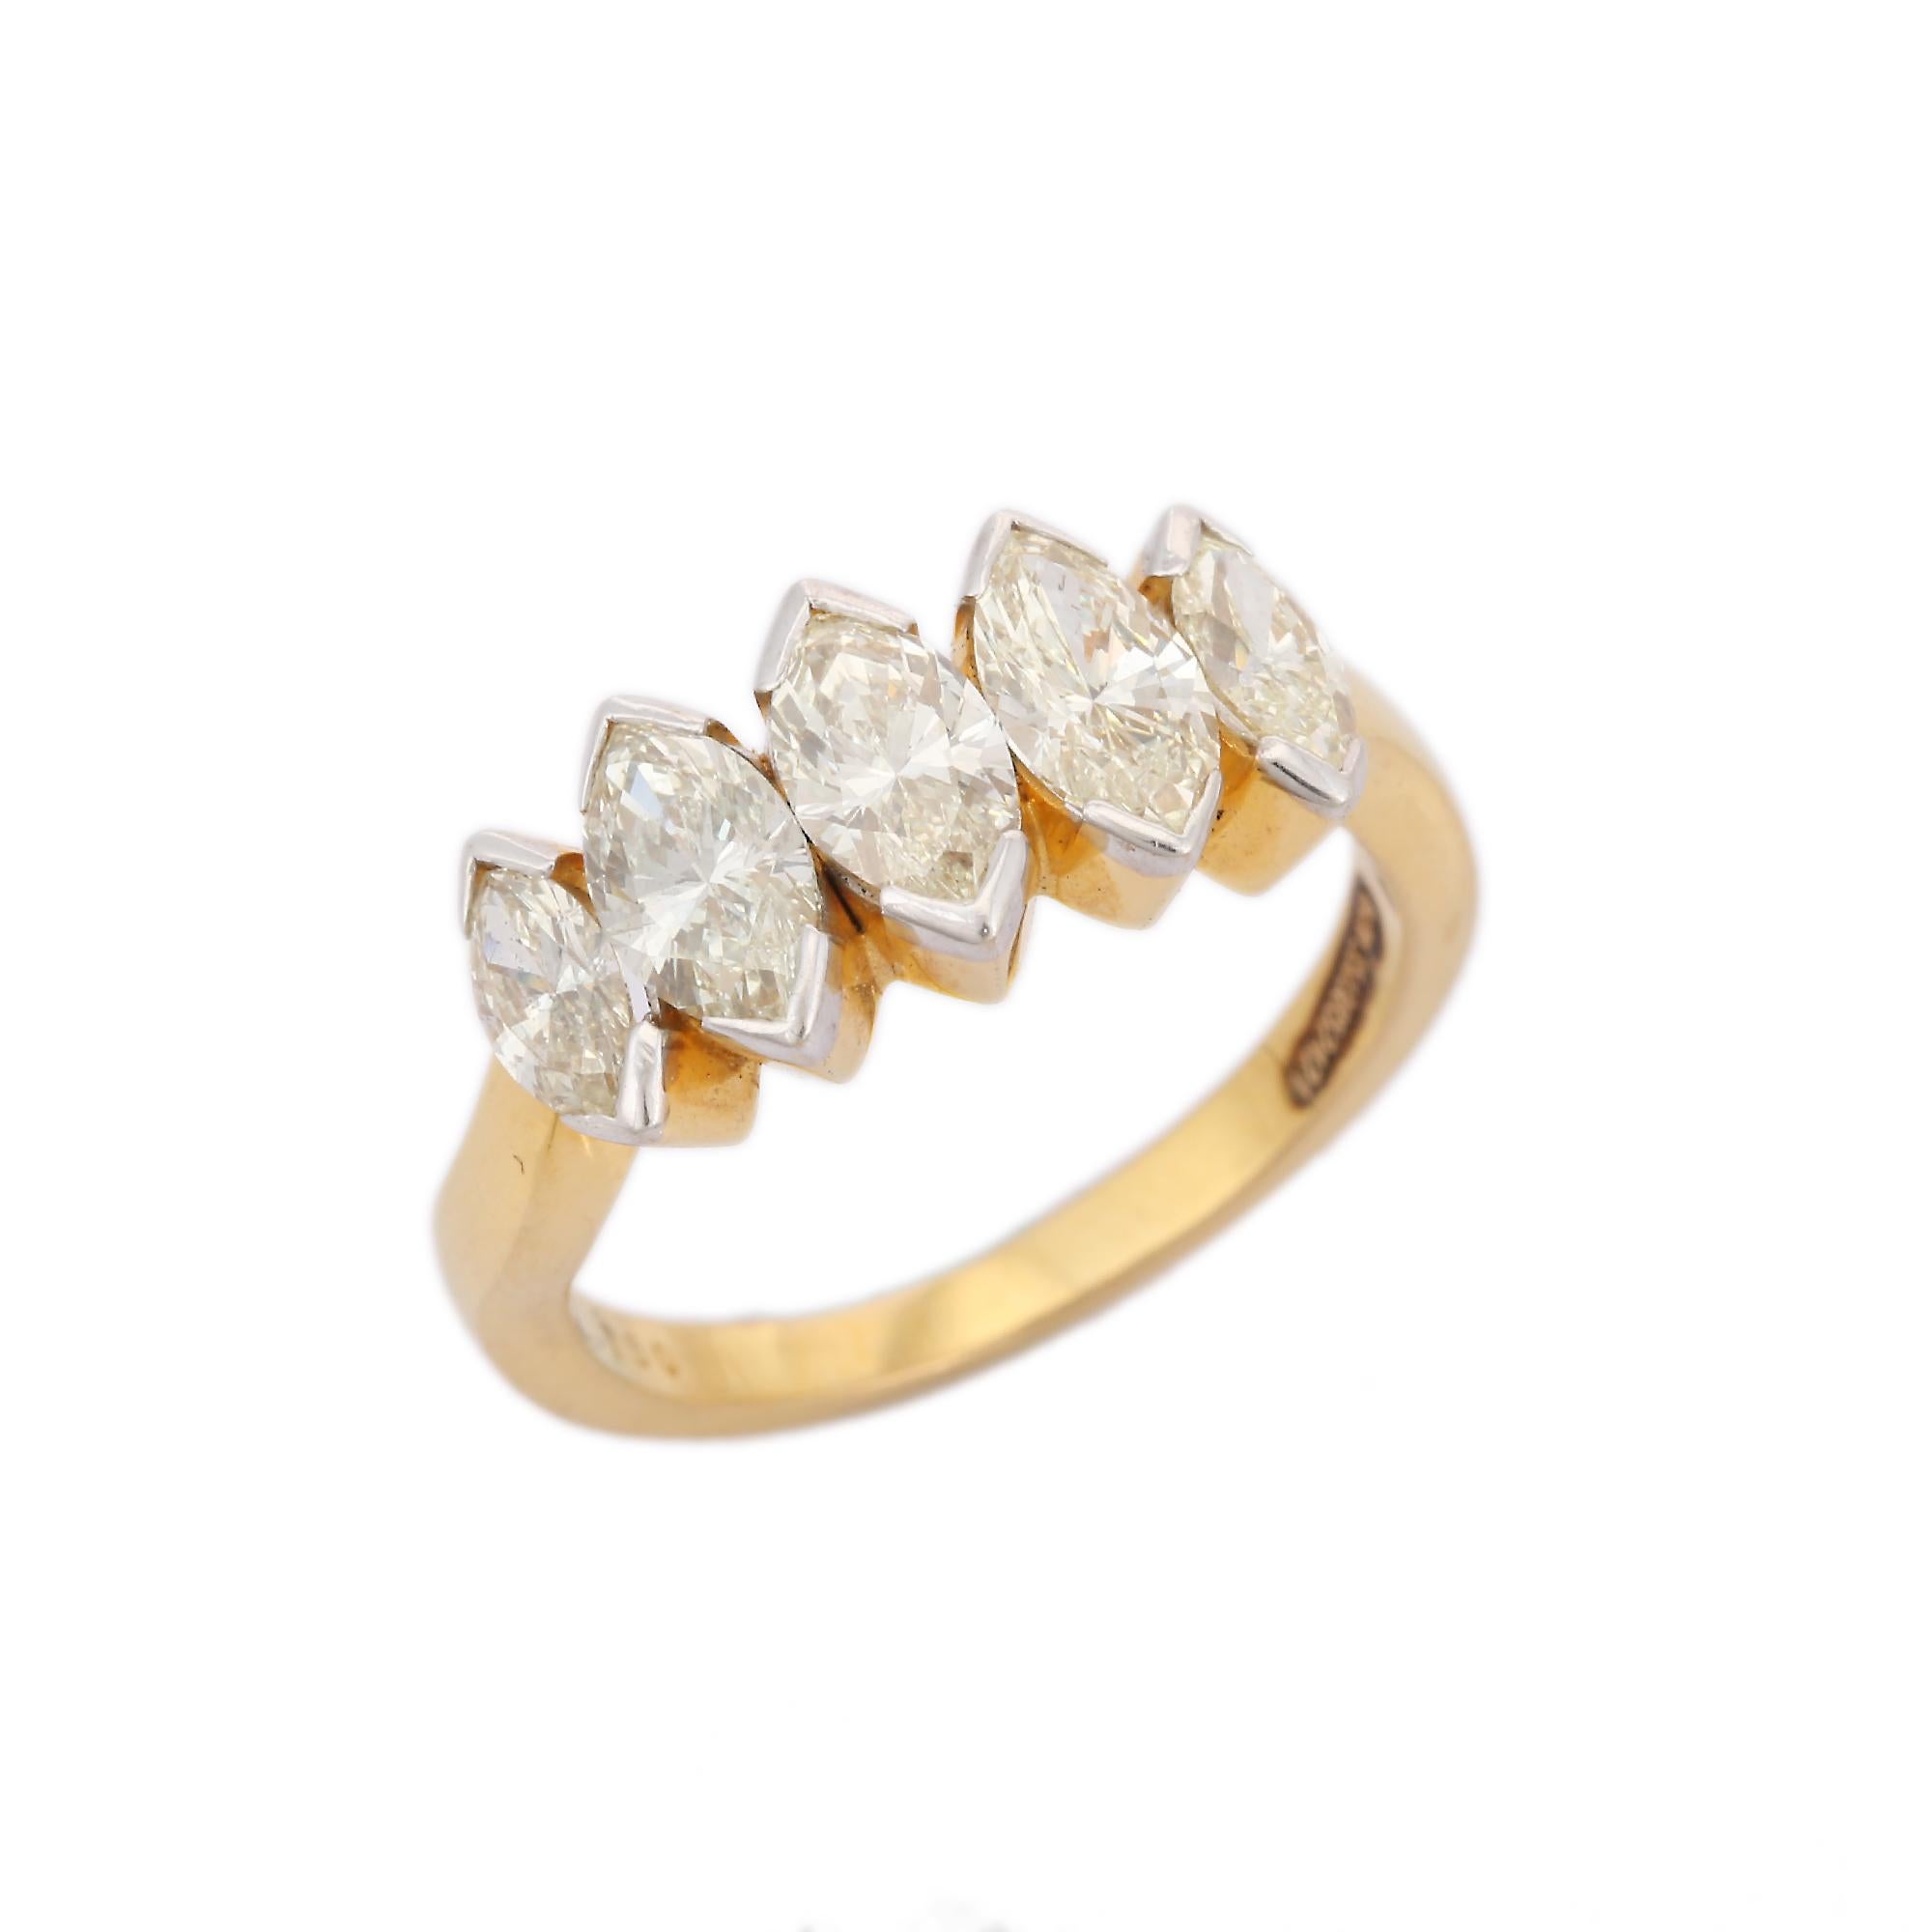 For Sale:  1.86 ct Marquise Cut Diamond Half Eternity Engagement Ring in 18K Yellow Gold  4